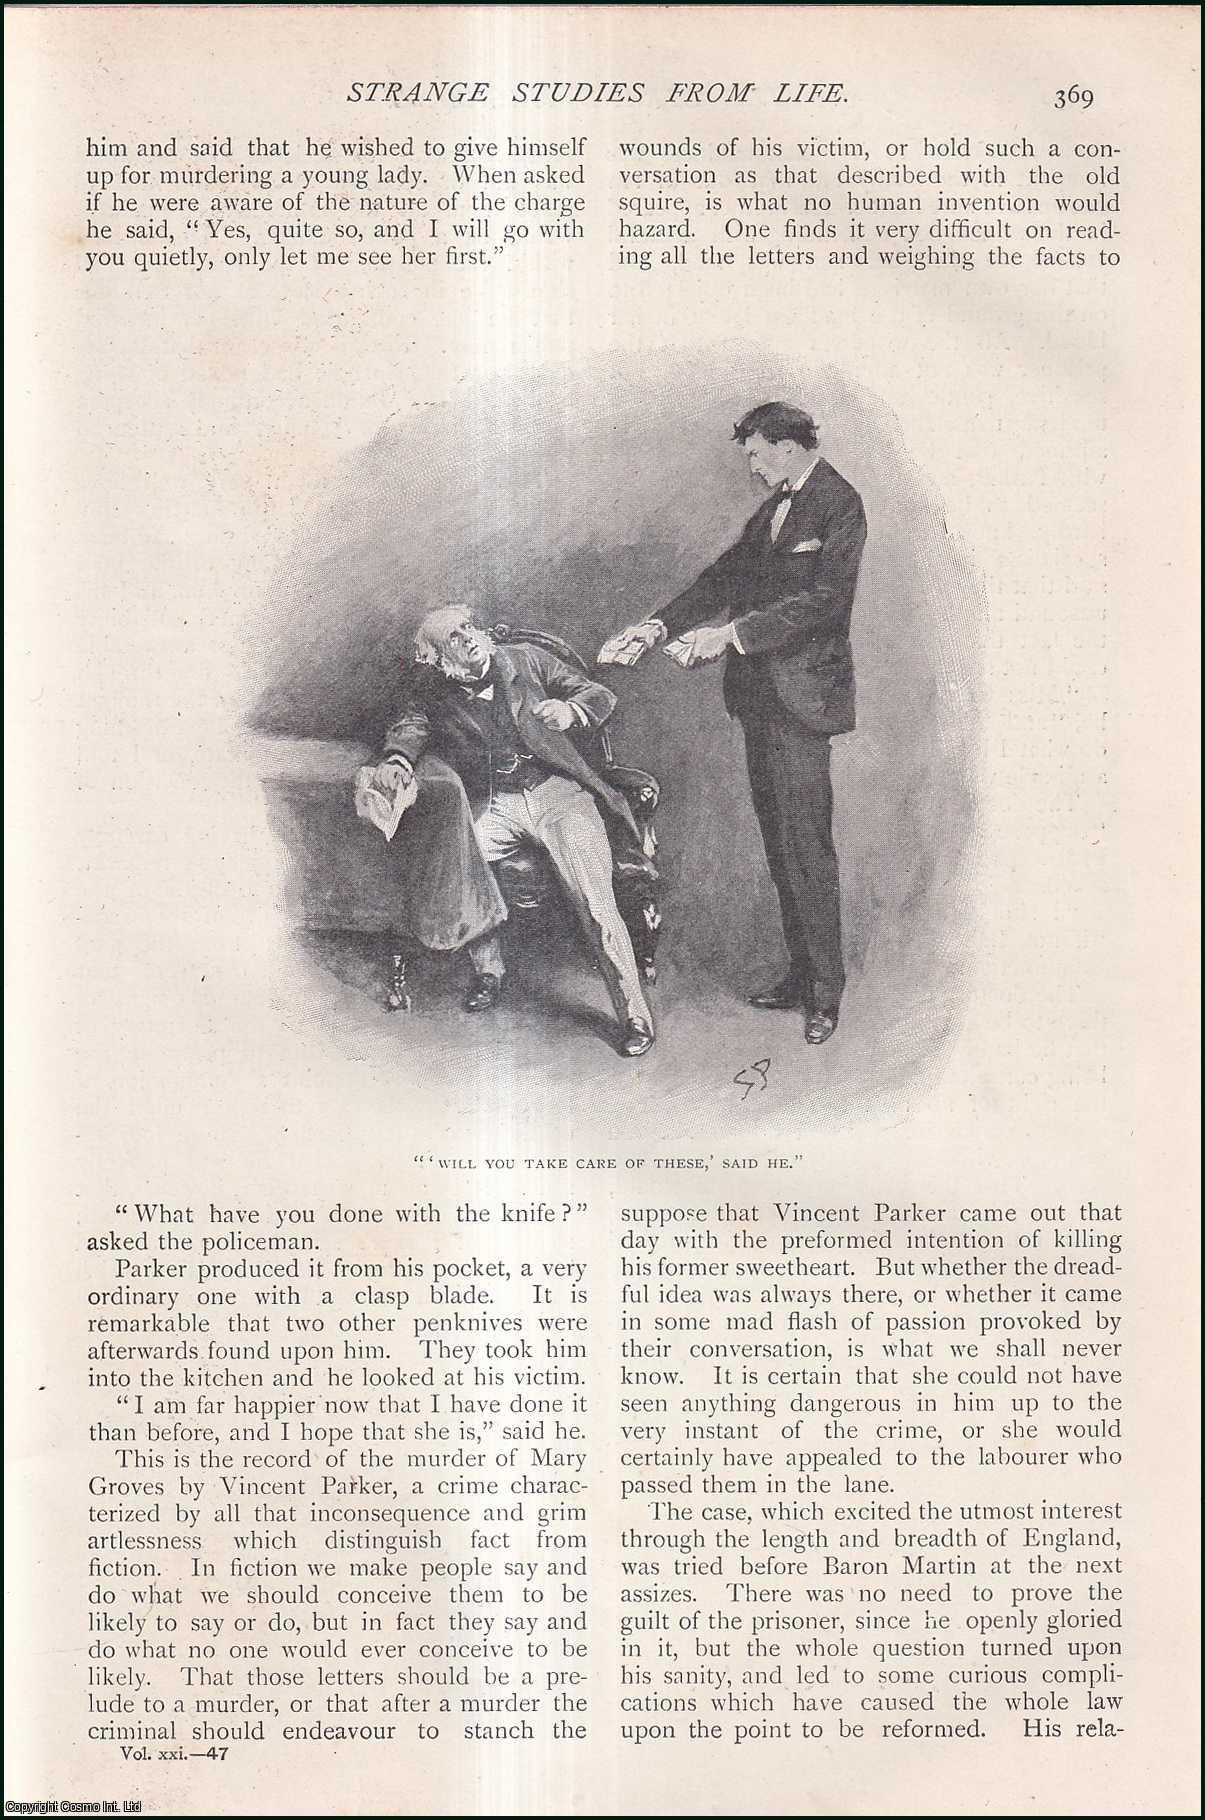 Arthur Conan Doyle - The Love Affair of George Vincent Parker, by A. Conan Doyle. An uncommon original article from The Strand Magazine, 1901.